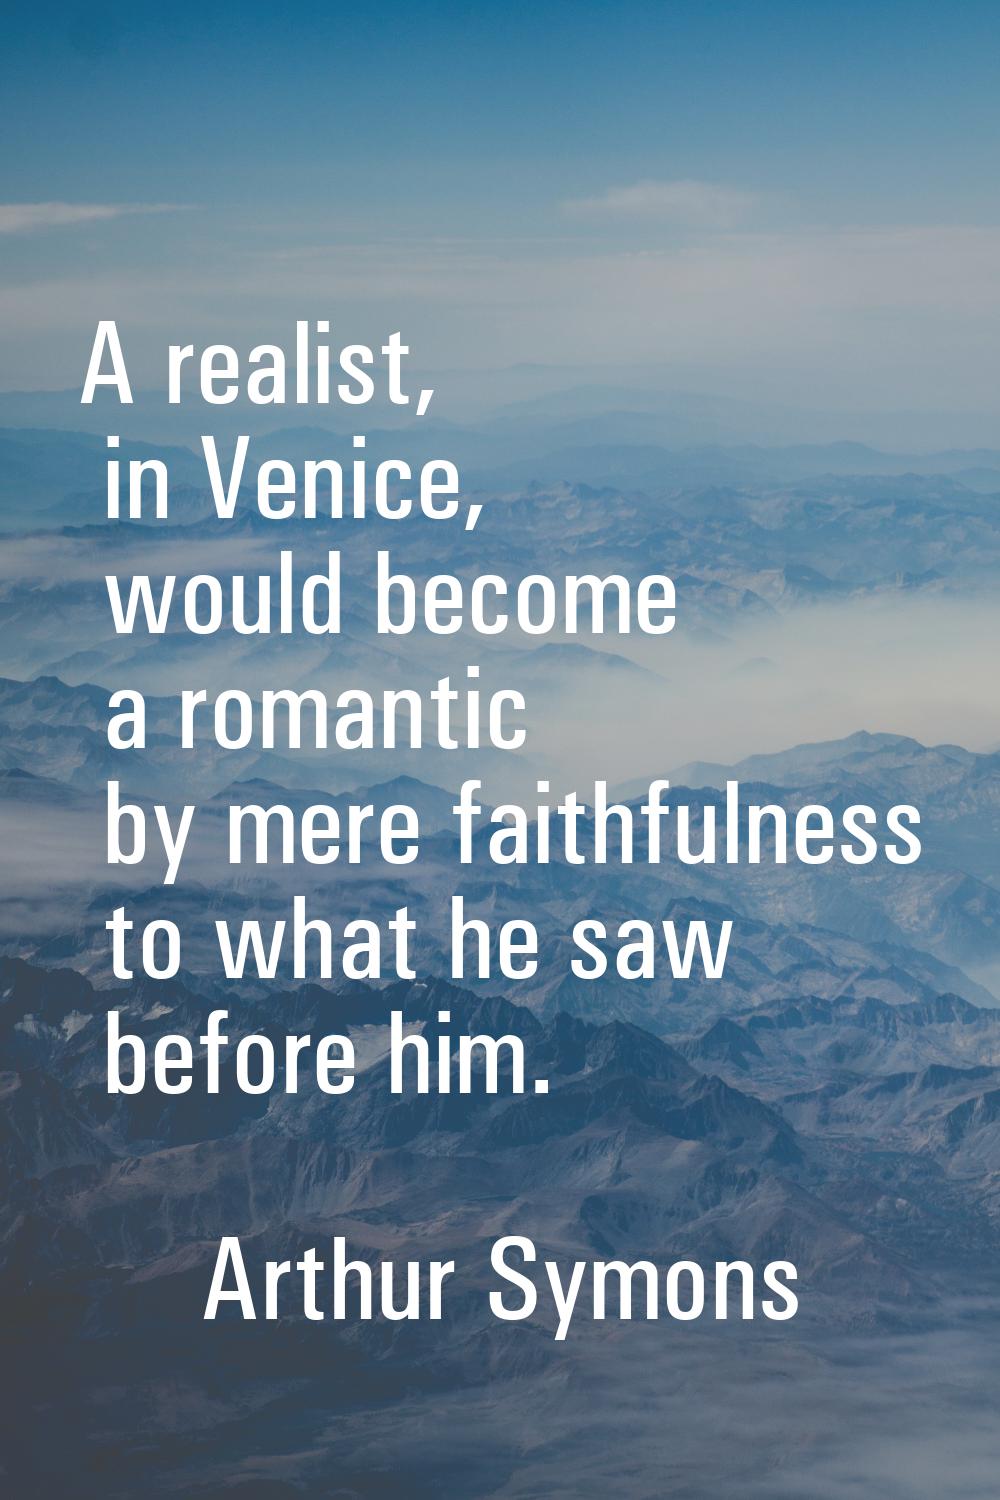 A realist, in Venice, would become a romantic by mere faithfulness to what he saw before him.